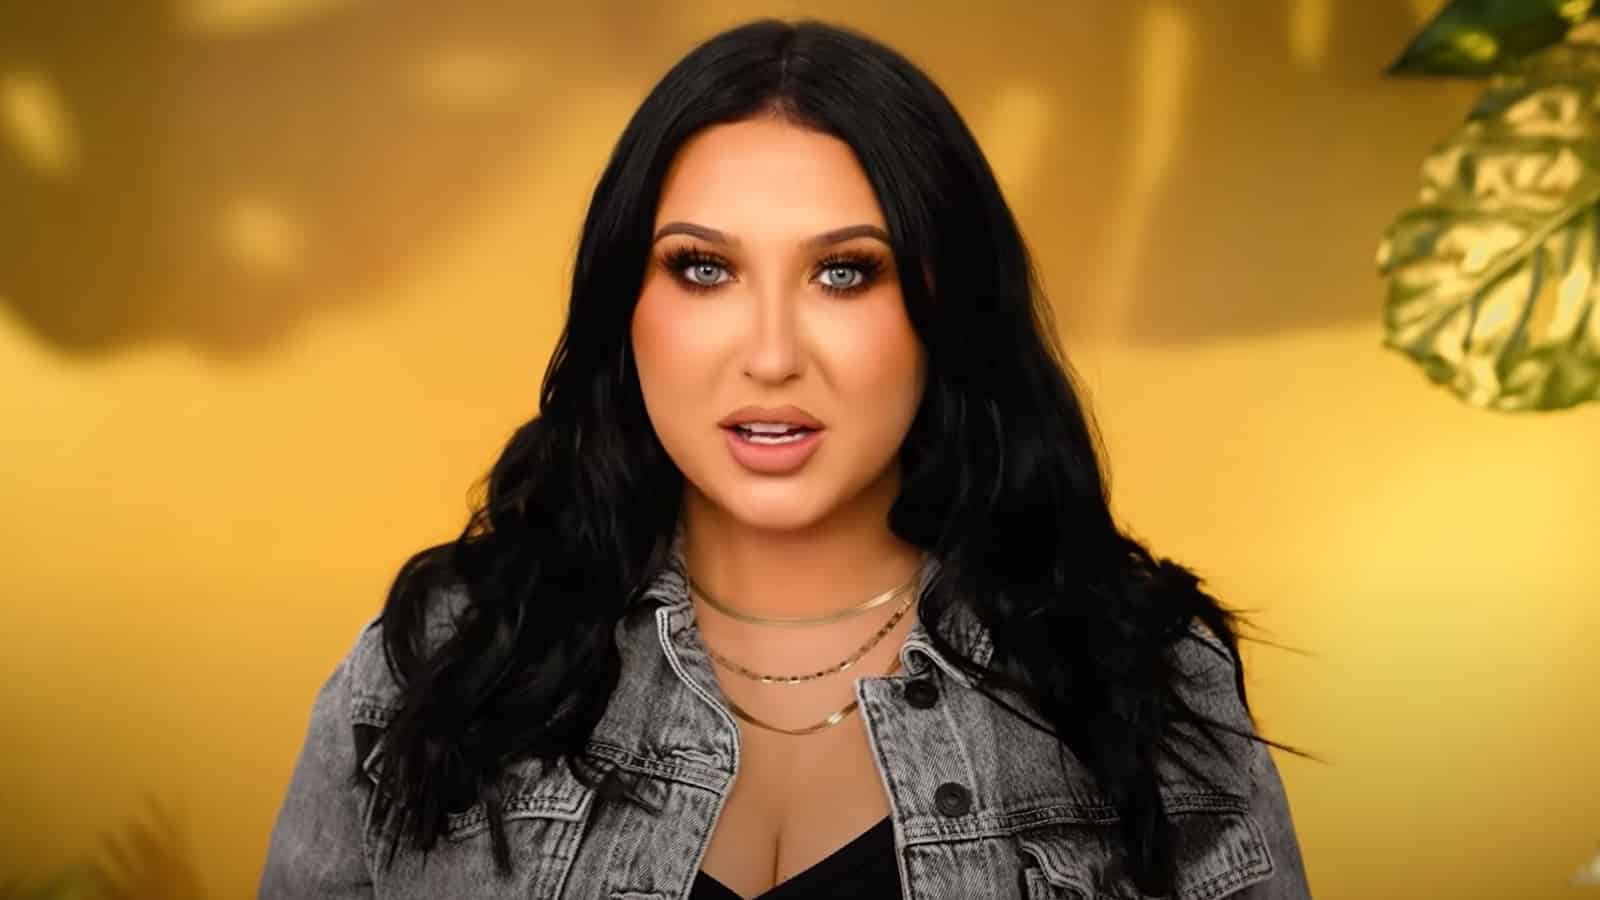 Jaclyn Hill hits back at accusations of “lying” about attempted kidnapping  - Dexerto